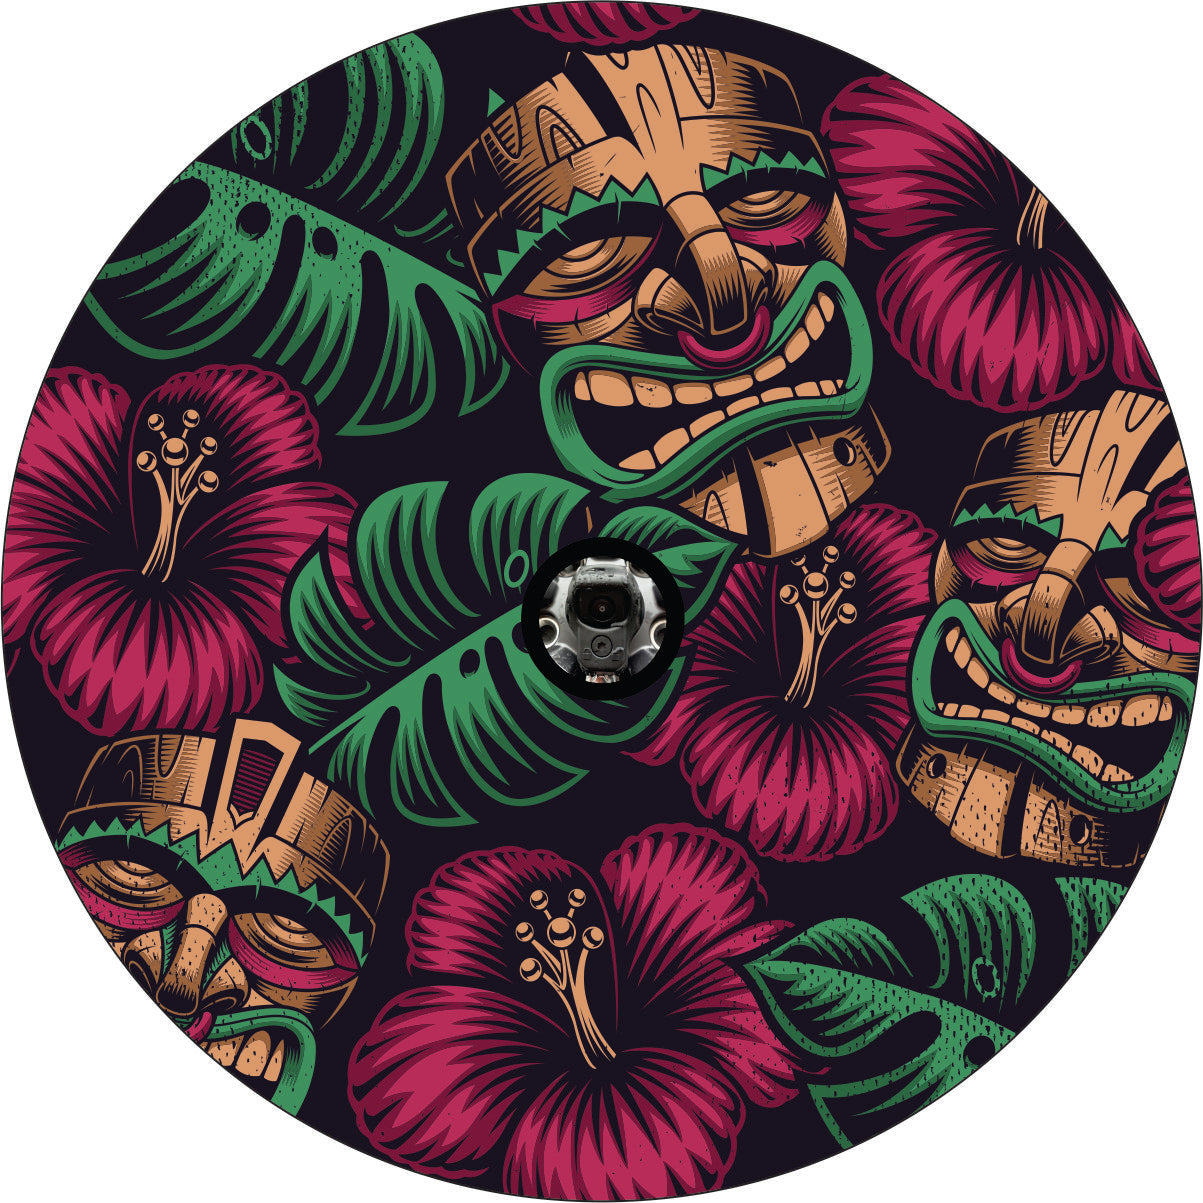 Hibiscus flowers and tiki mask pattern custom made to order spare tire cover design for black vinyl wheel covers on Jeeps, RV, Campers, Trailers, Broncos and more. Designed to fit vehicle wheel covers that need a camera hole. 